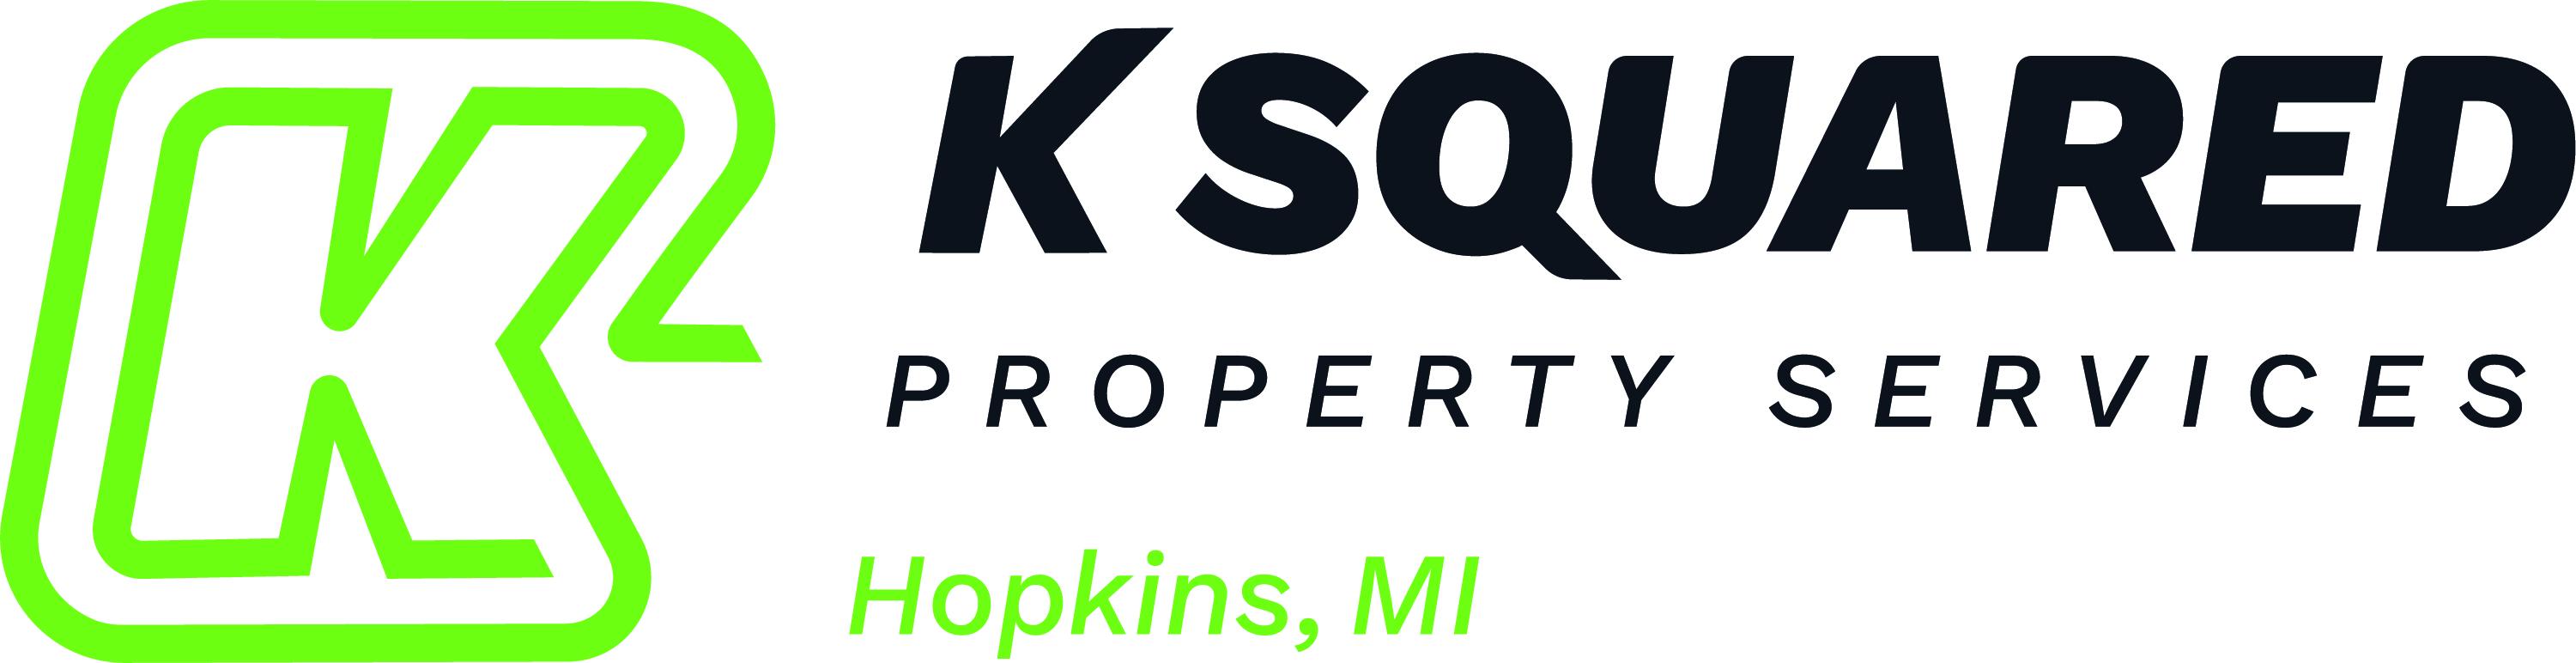 K Squared Property Services 1970 128th Ave, Hopkins Michigan 49328